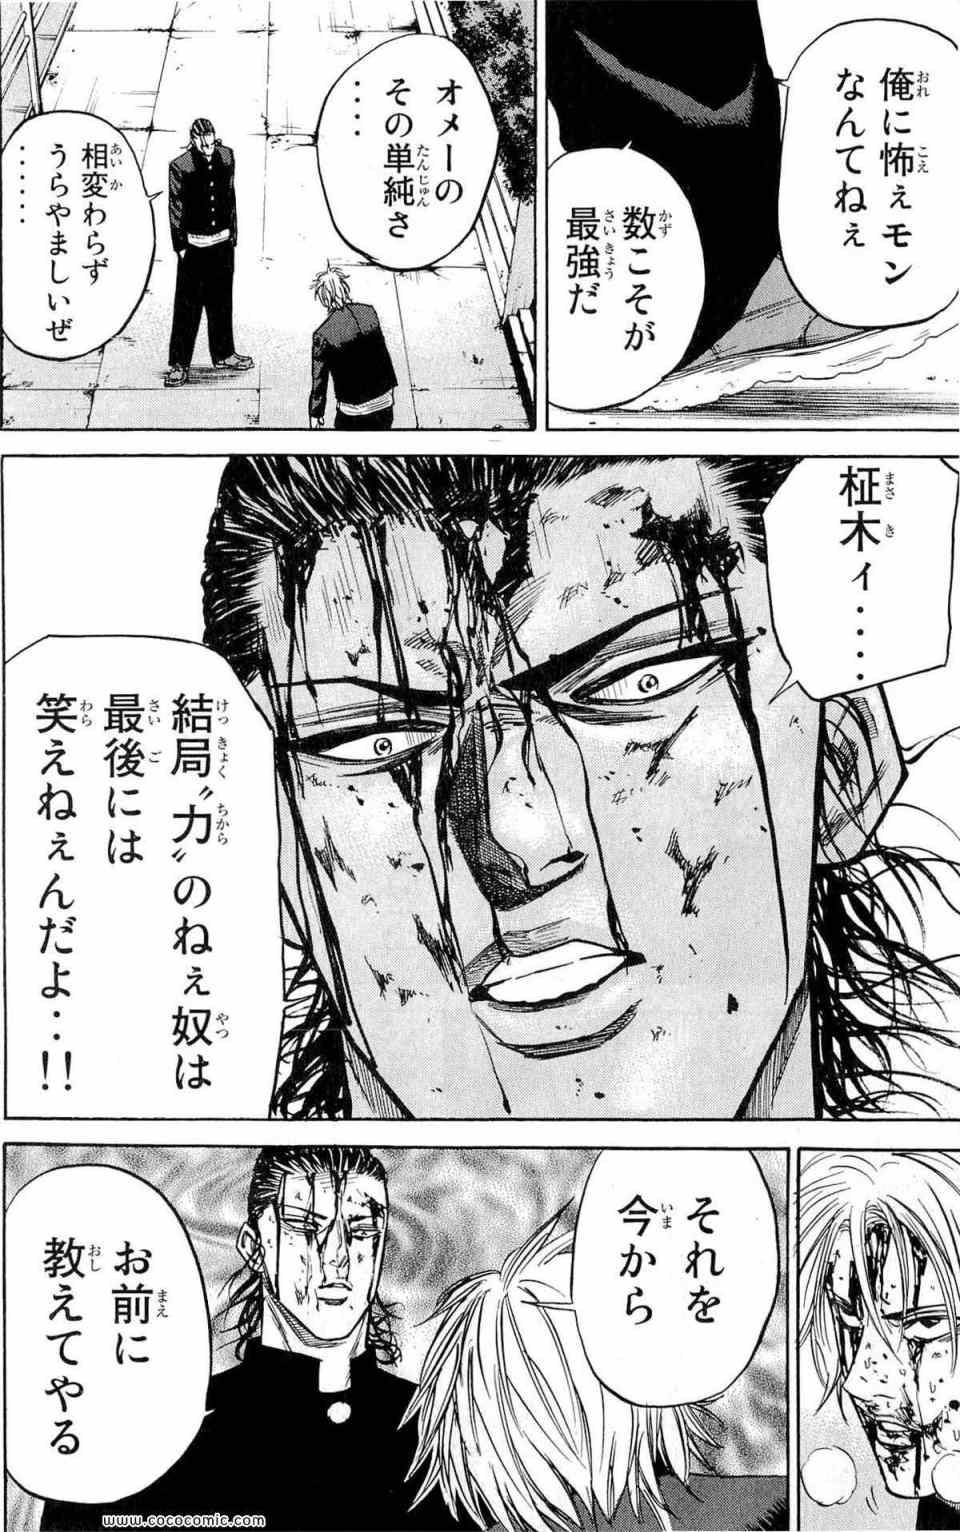 《A-BOUT!(日文)》漫画 A-BOUT! 02卷